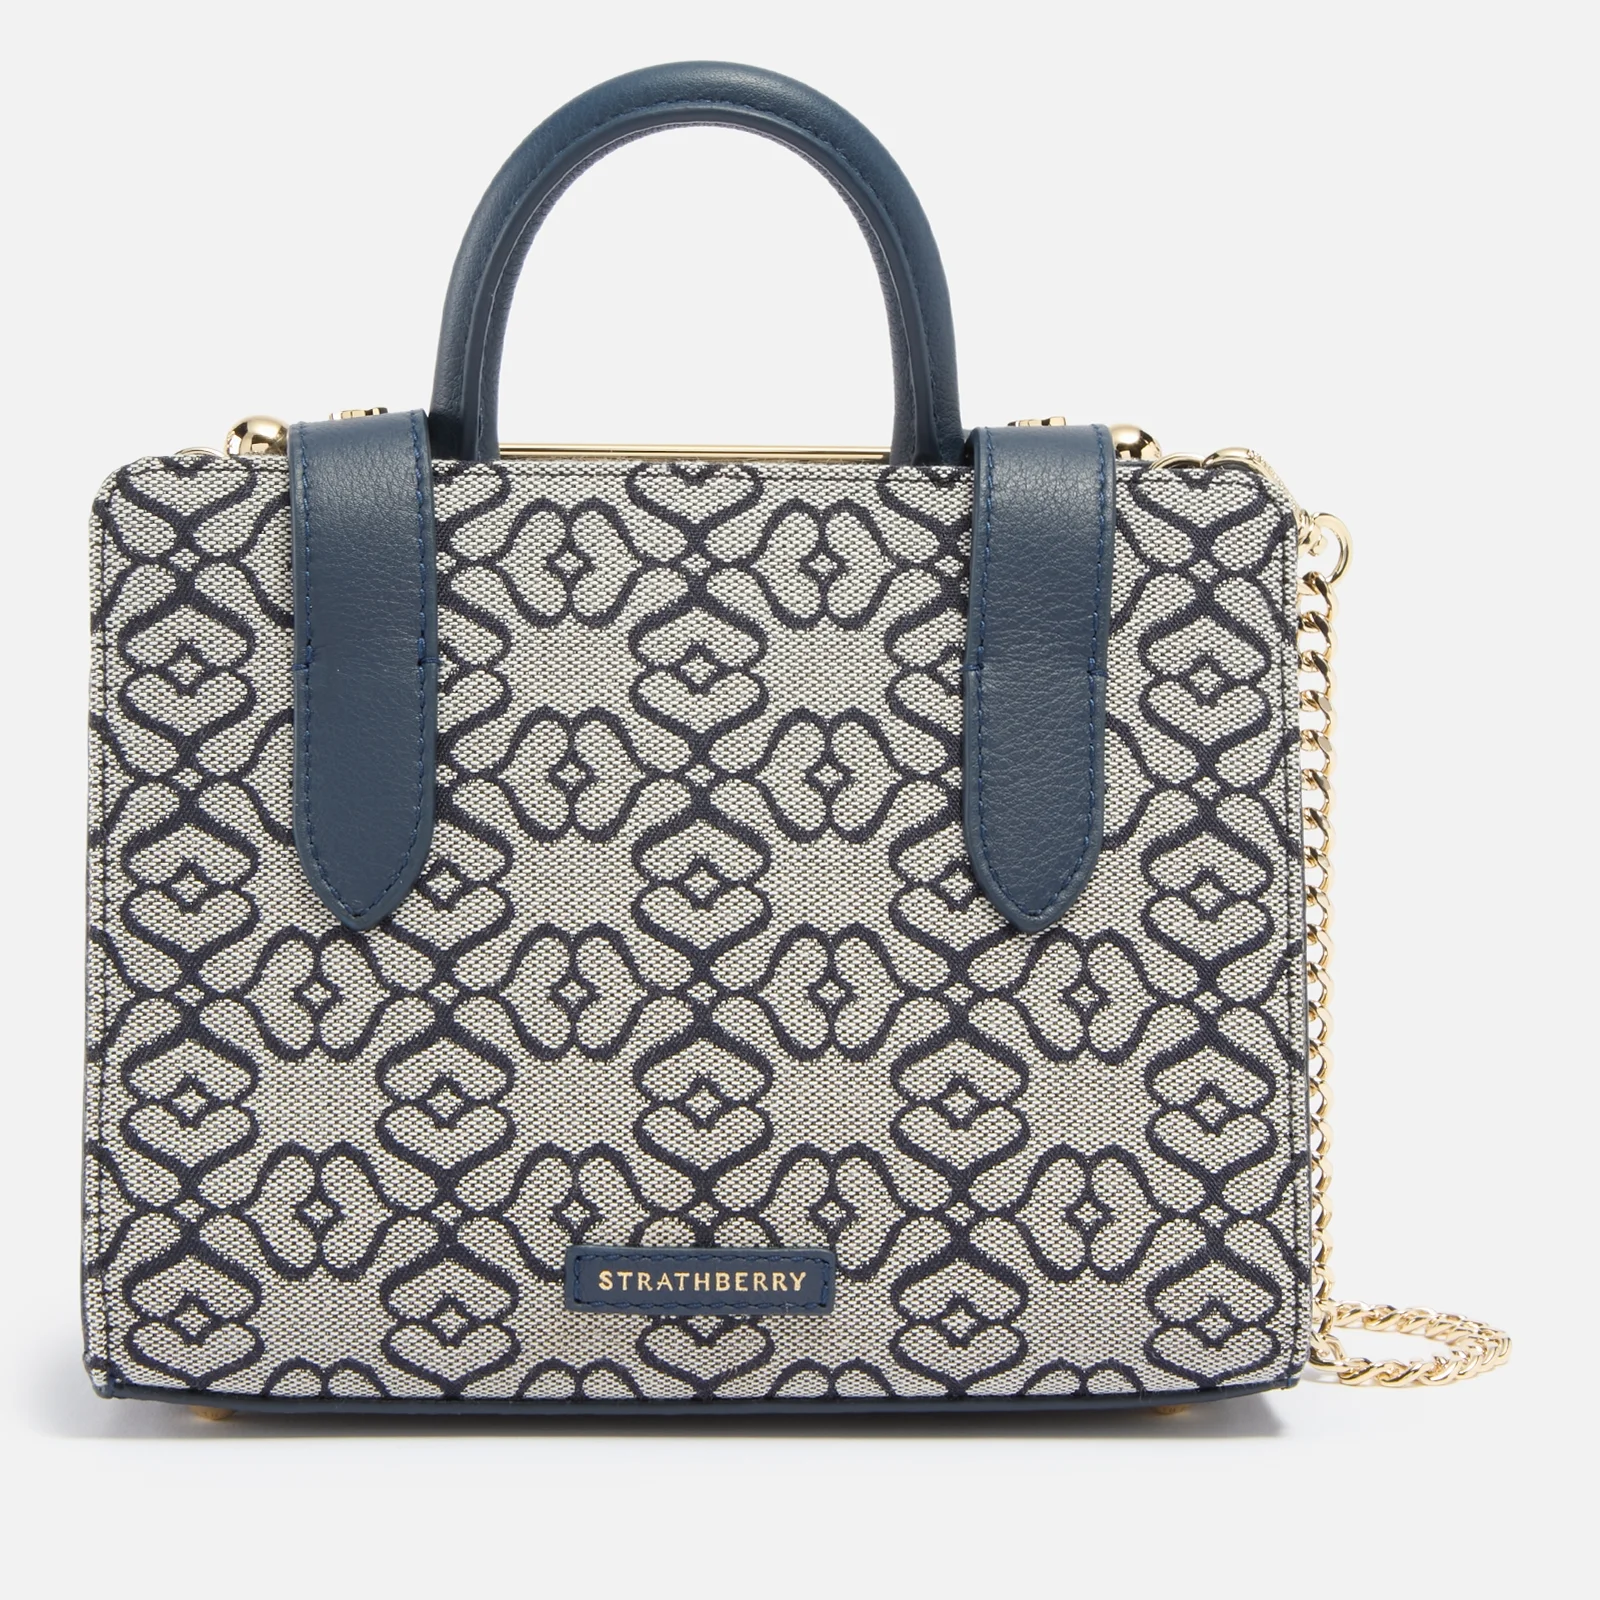 Strathberry Monogram Nano Leather-Trimmed Tote Bag Image 1